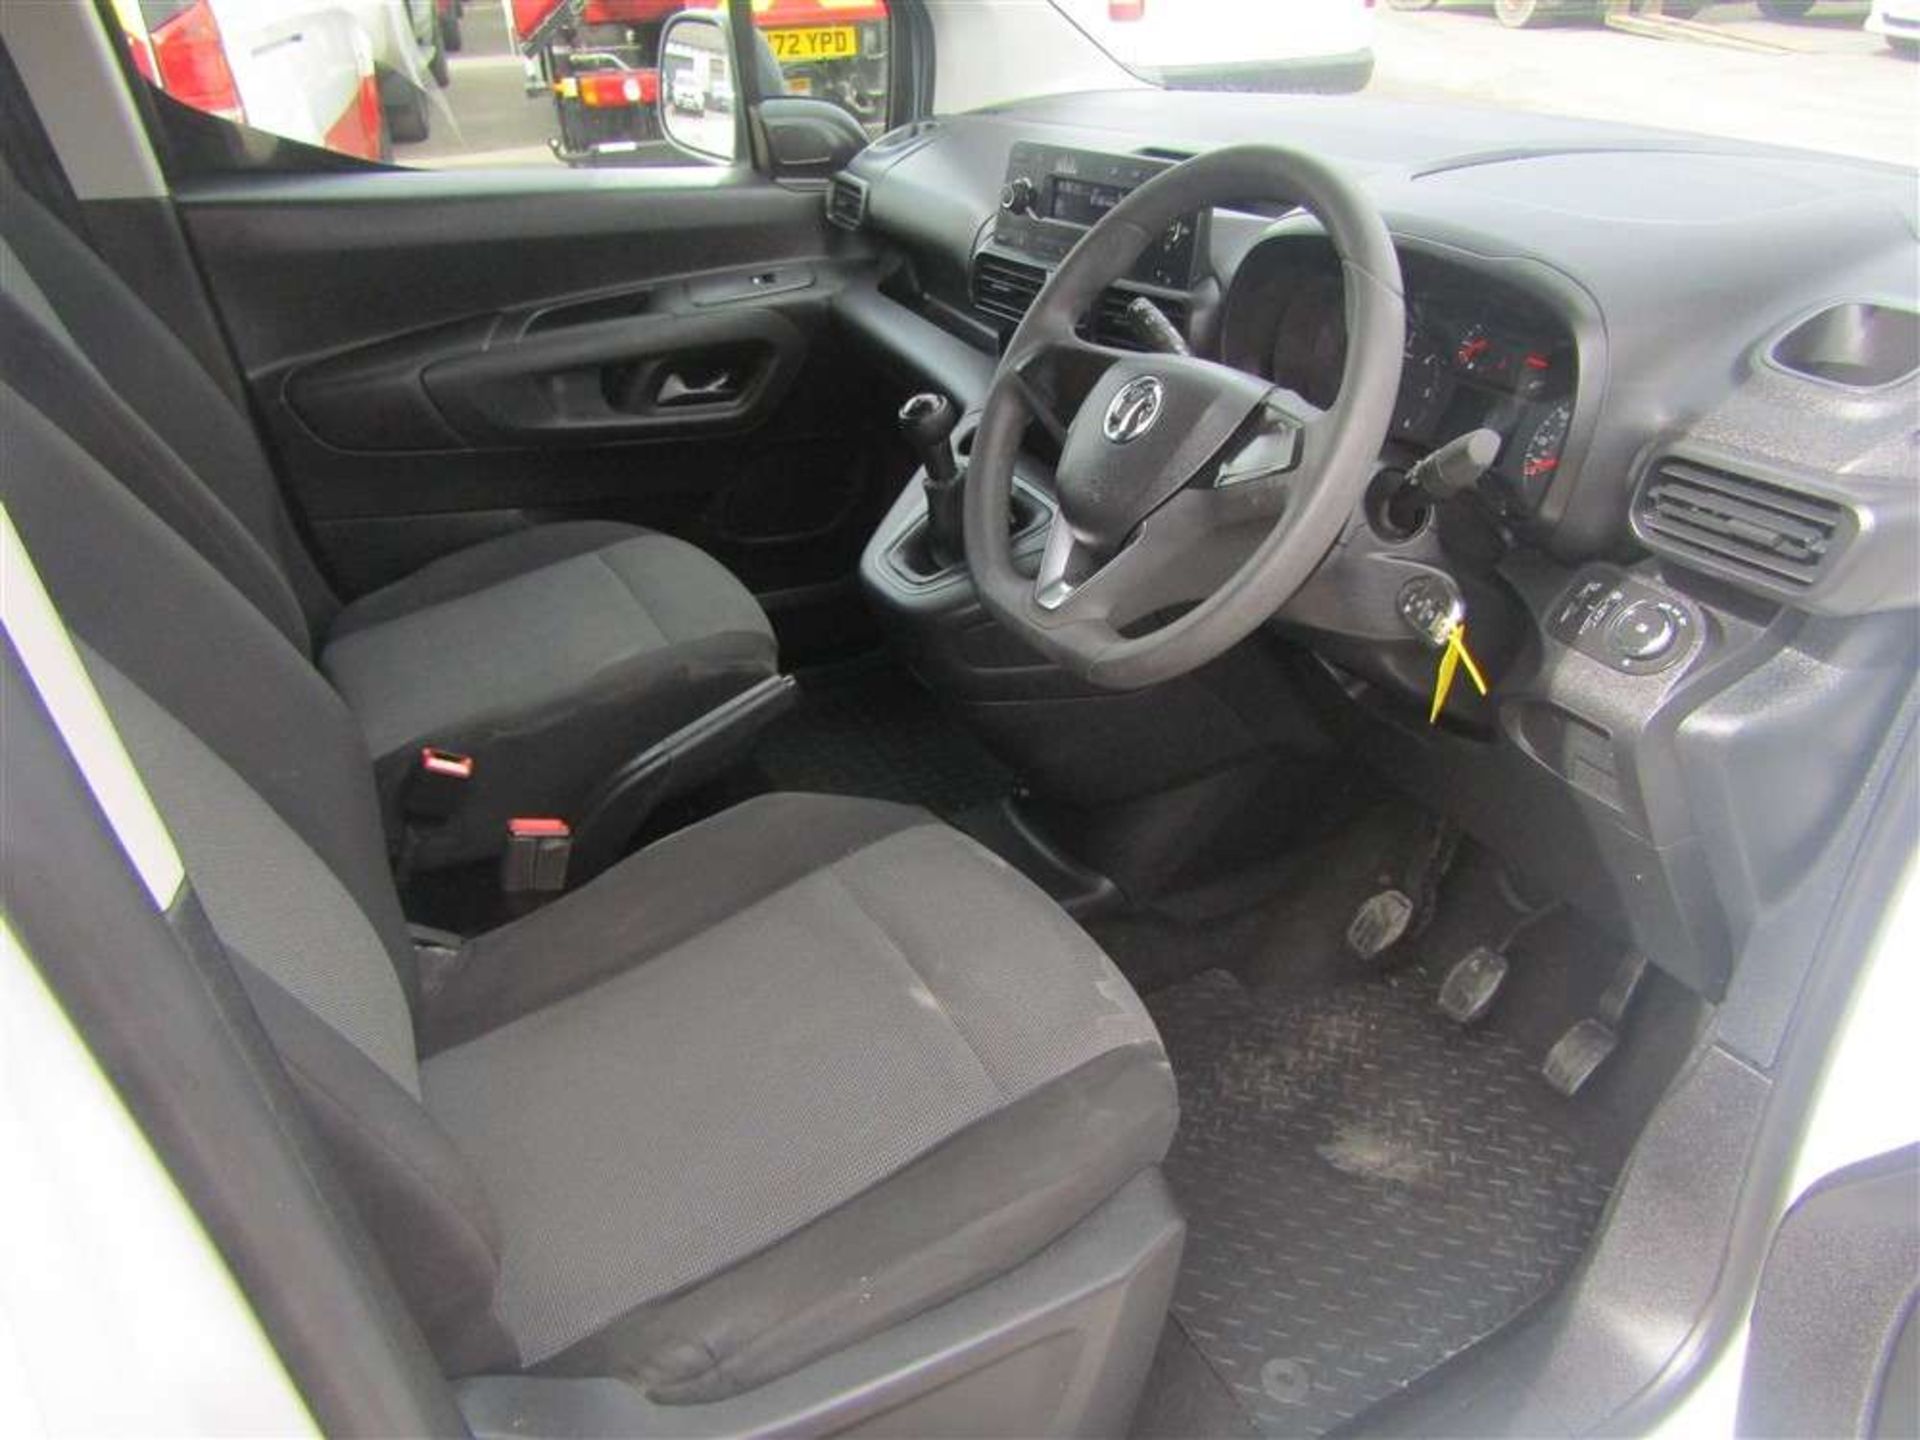 2019 19 reg Vauxhall Combo 2000 Edition T/D S/S - ONLY 36K Miles - Image 6 of 7